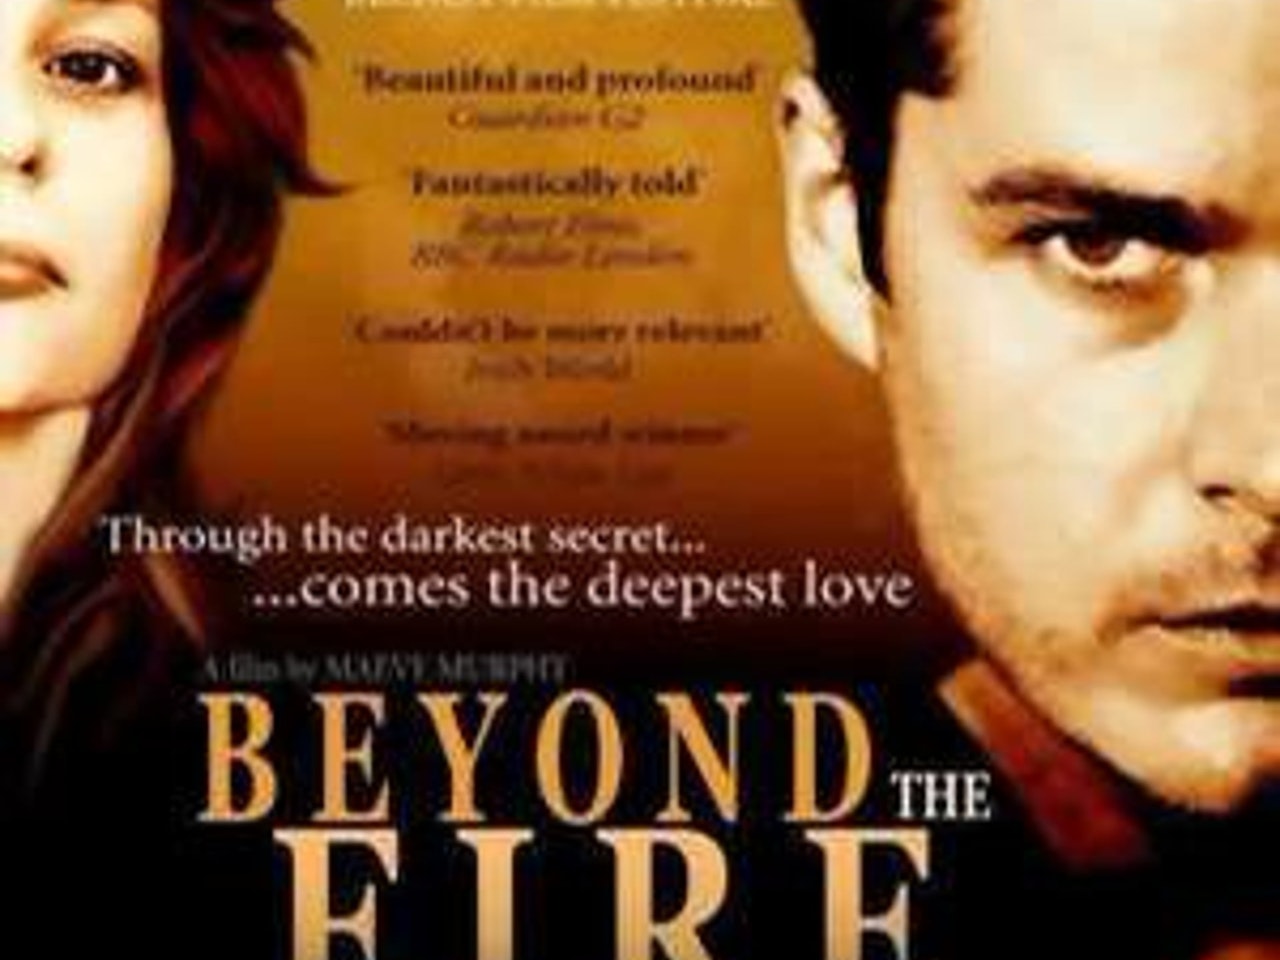 BEYOND THE FIRE - movie trailer